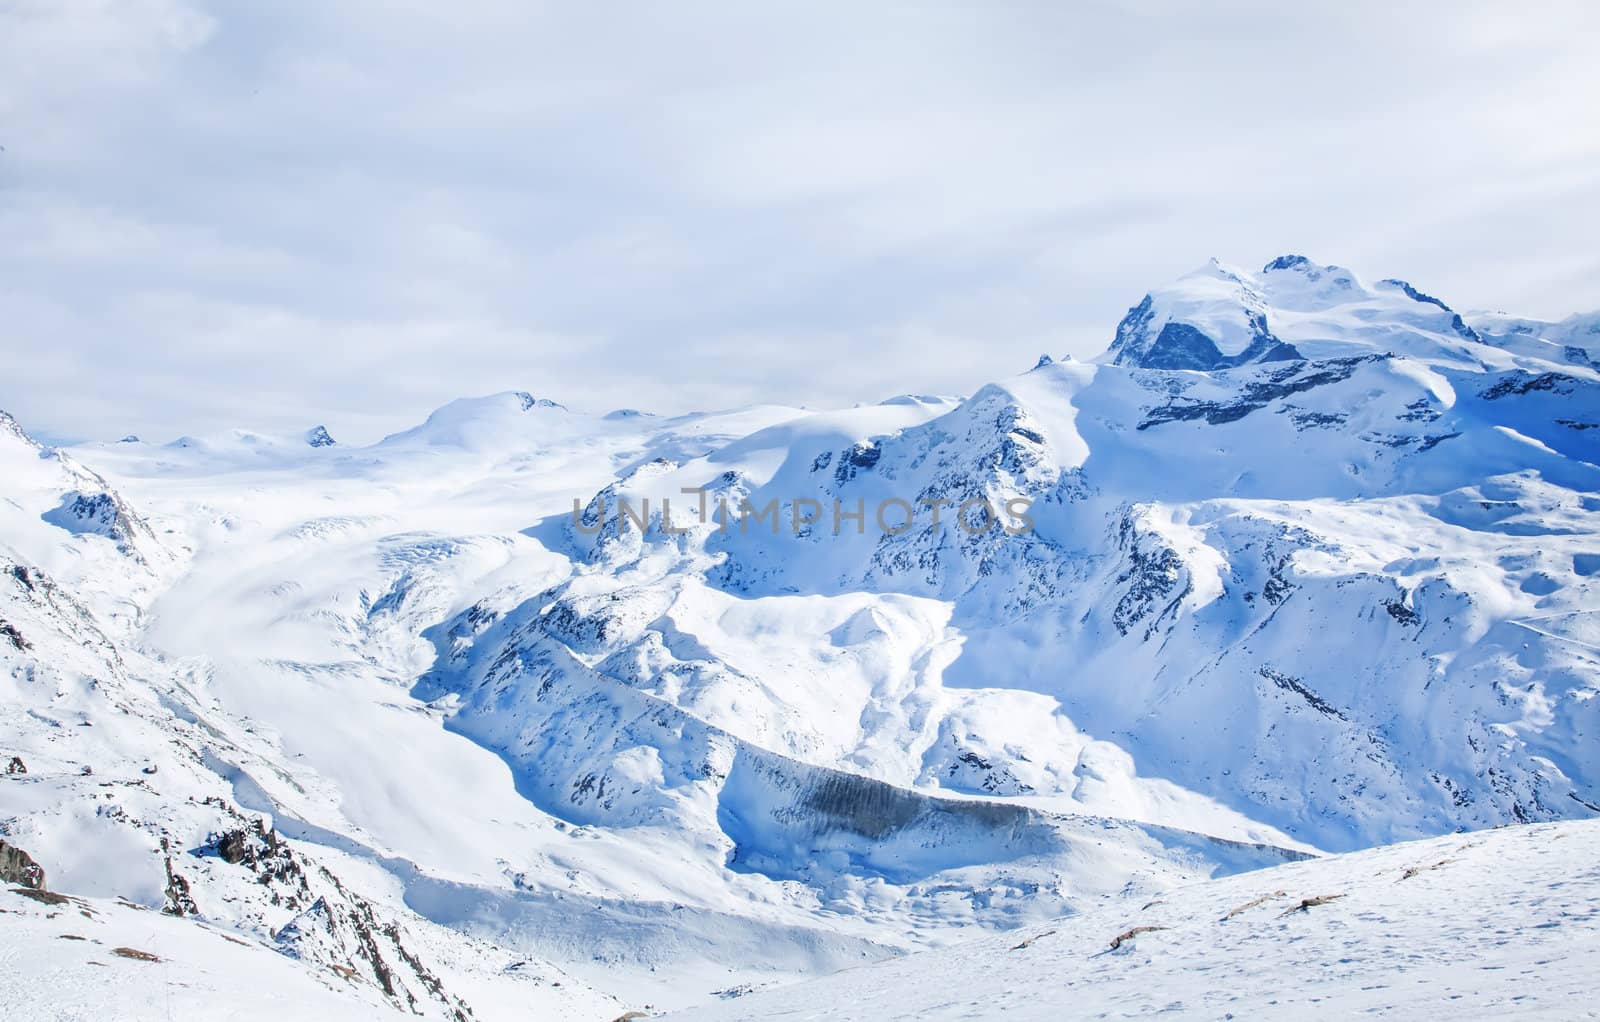 Winter blue and white landscape on Switzerland hills in February by RawGroup